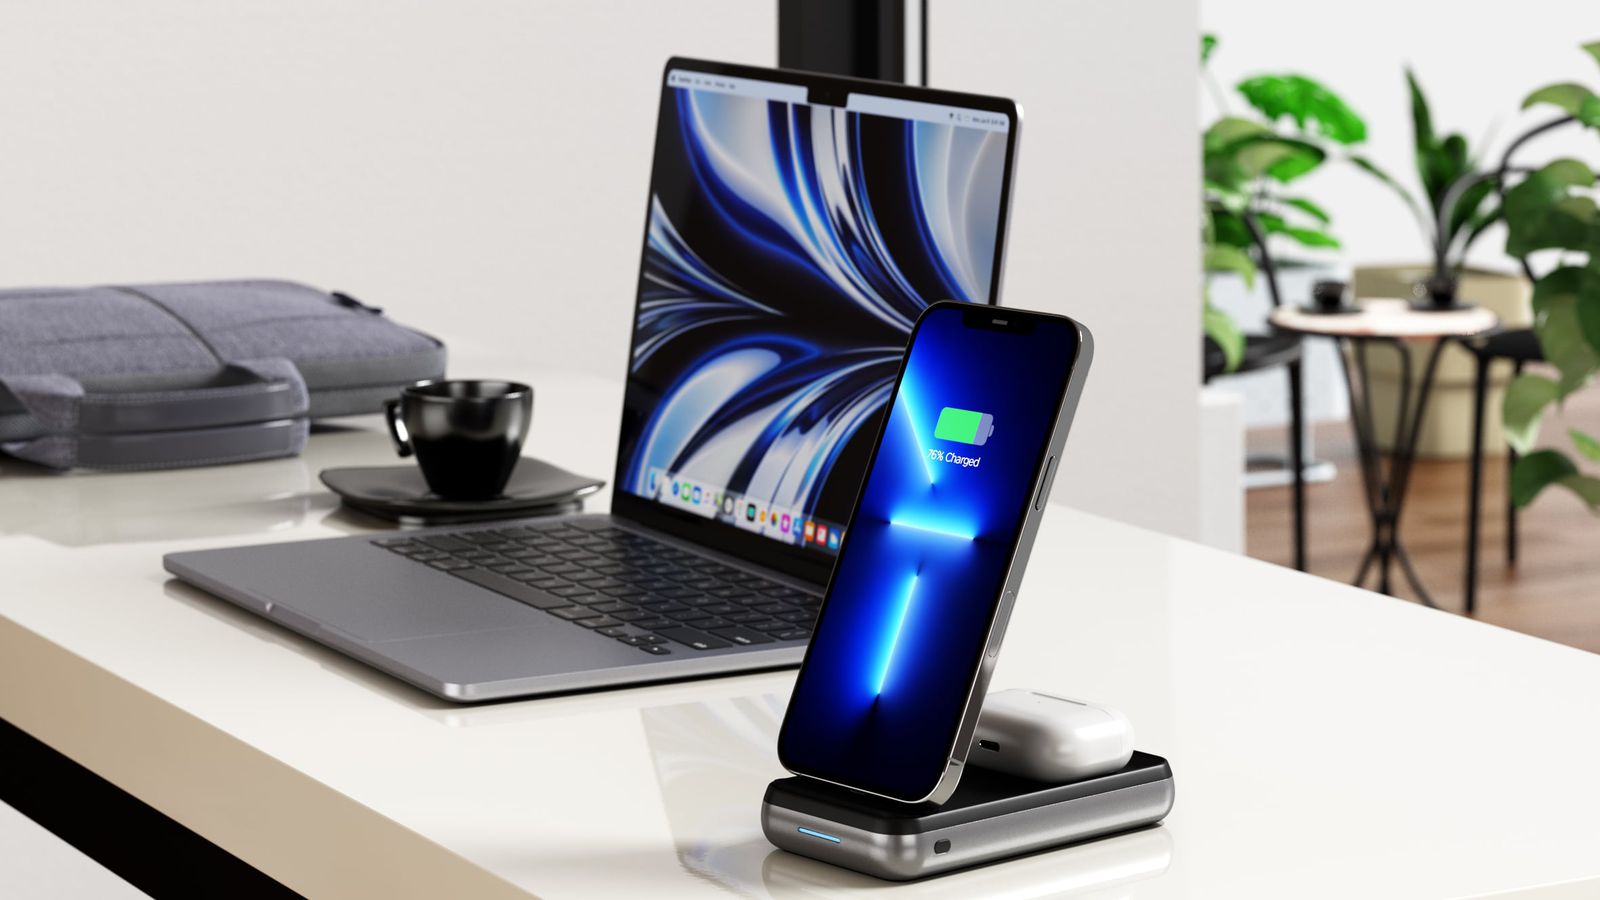 Satechi Duo Wireless Charger Power Stand: 10,000mAh battery and wireless charging dock for iPhones and AirPods